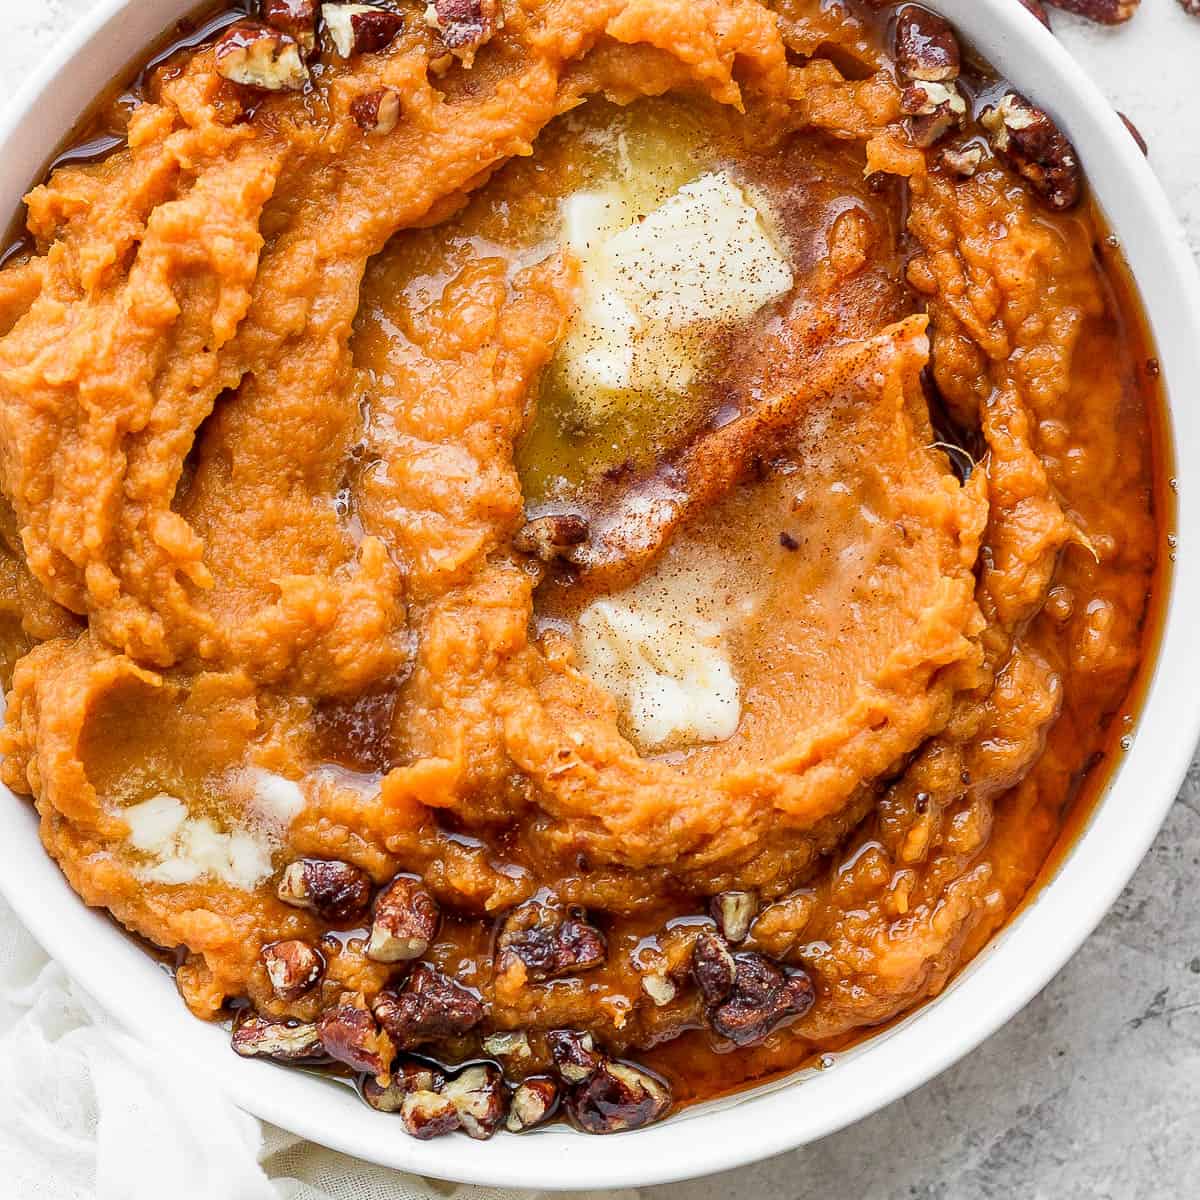 Bowl of mashed sweet potatoes with melted butter and candied pecans.